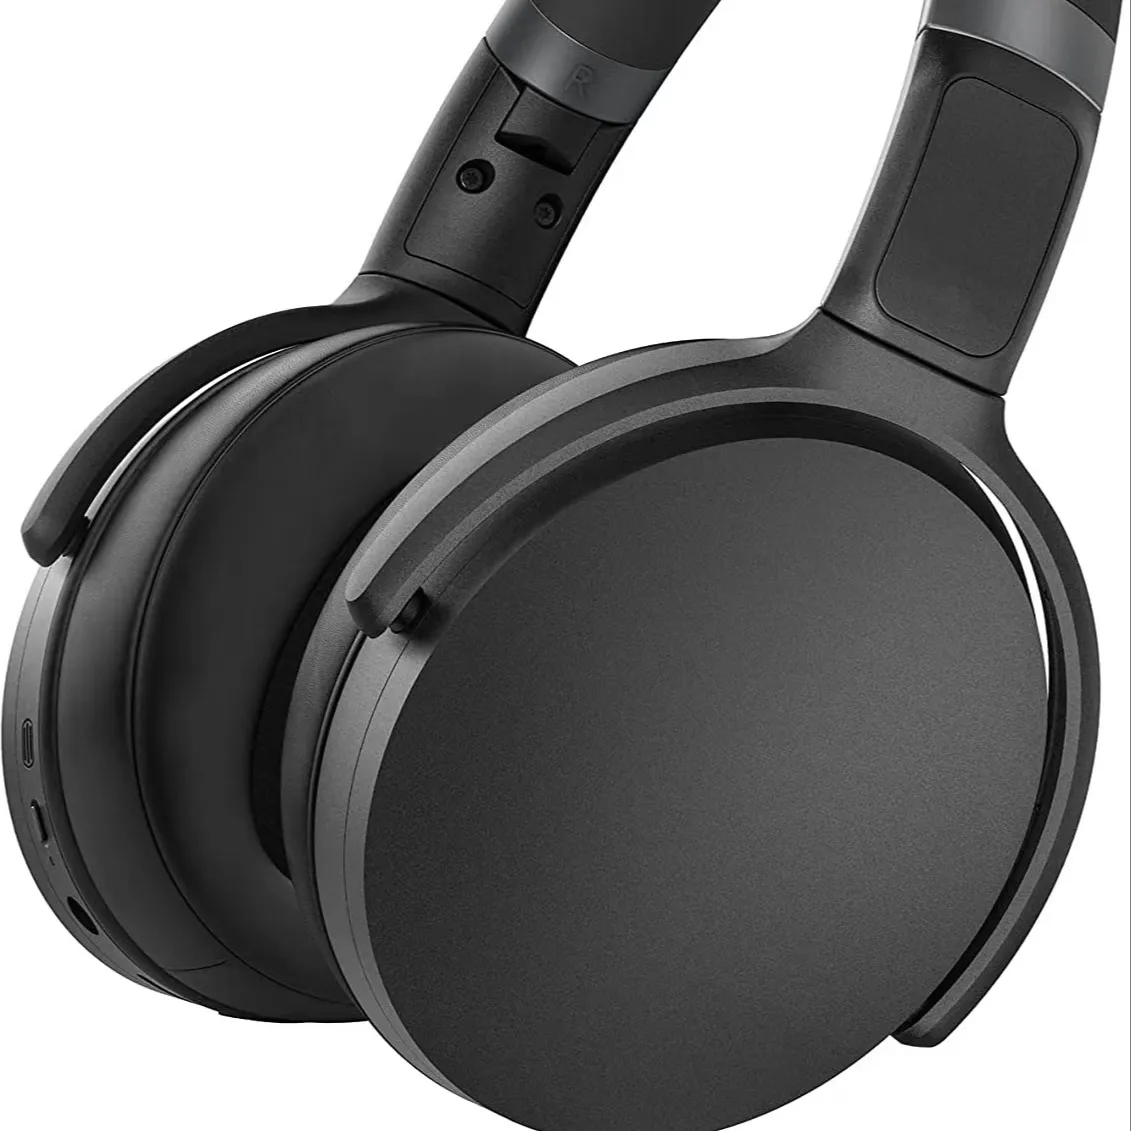 HD 450BT wireless 5.0 Wireless Headphone with Active Noise Cancellation - 30-Hour Battery Life, USB-C Fast Charging